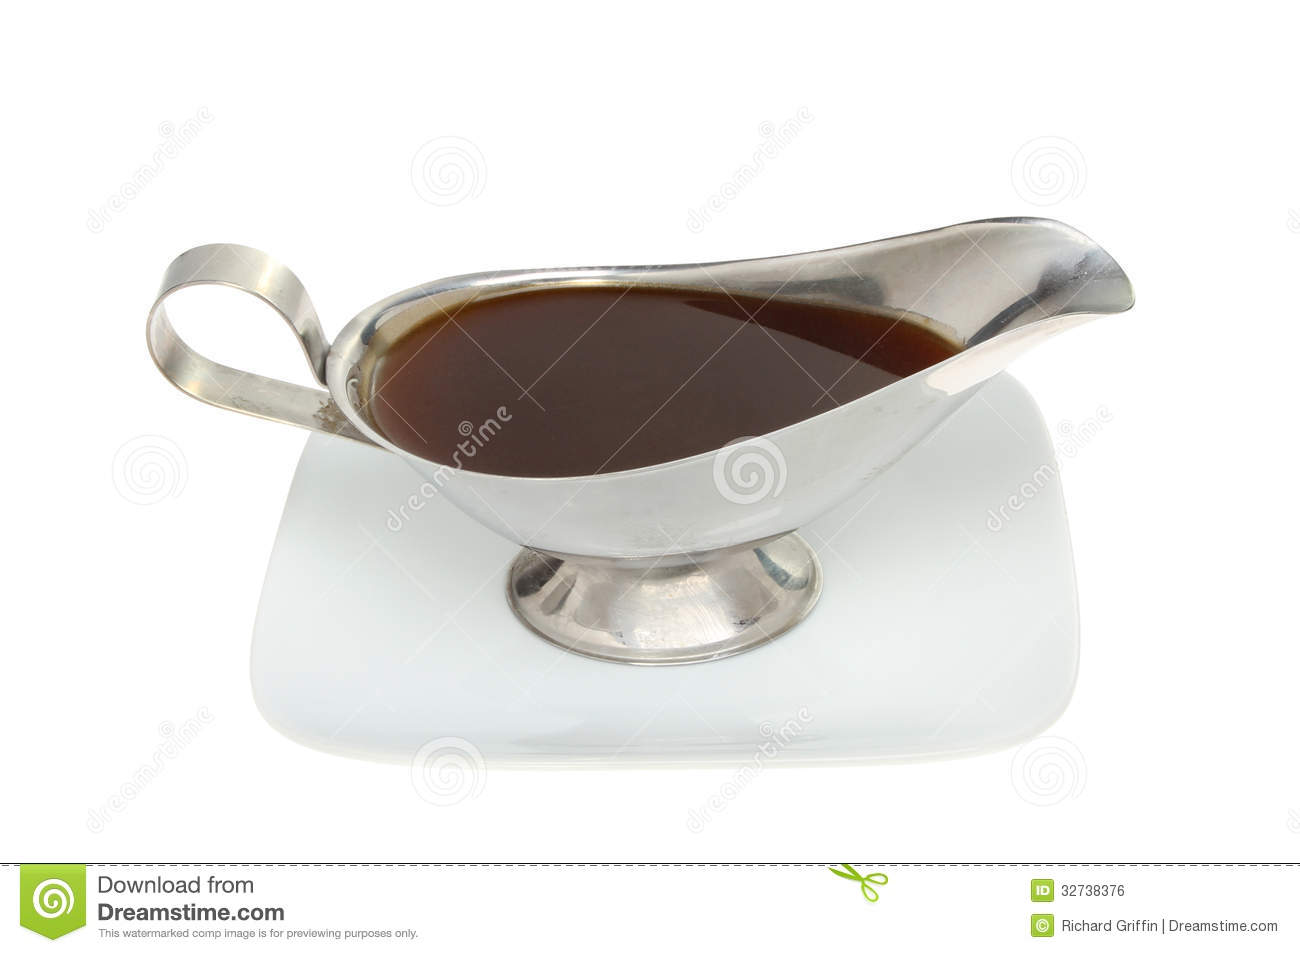 Meat Gravy In A Stainless Steel Gravy Boat On A Plate Isolated Against